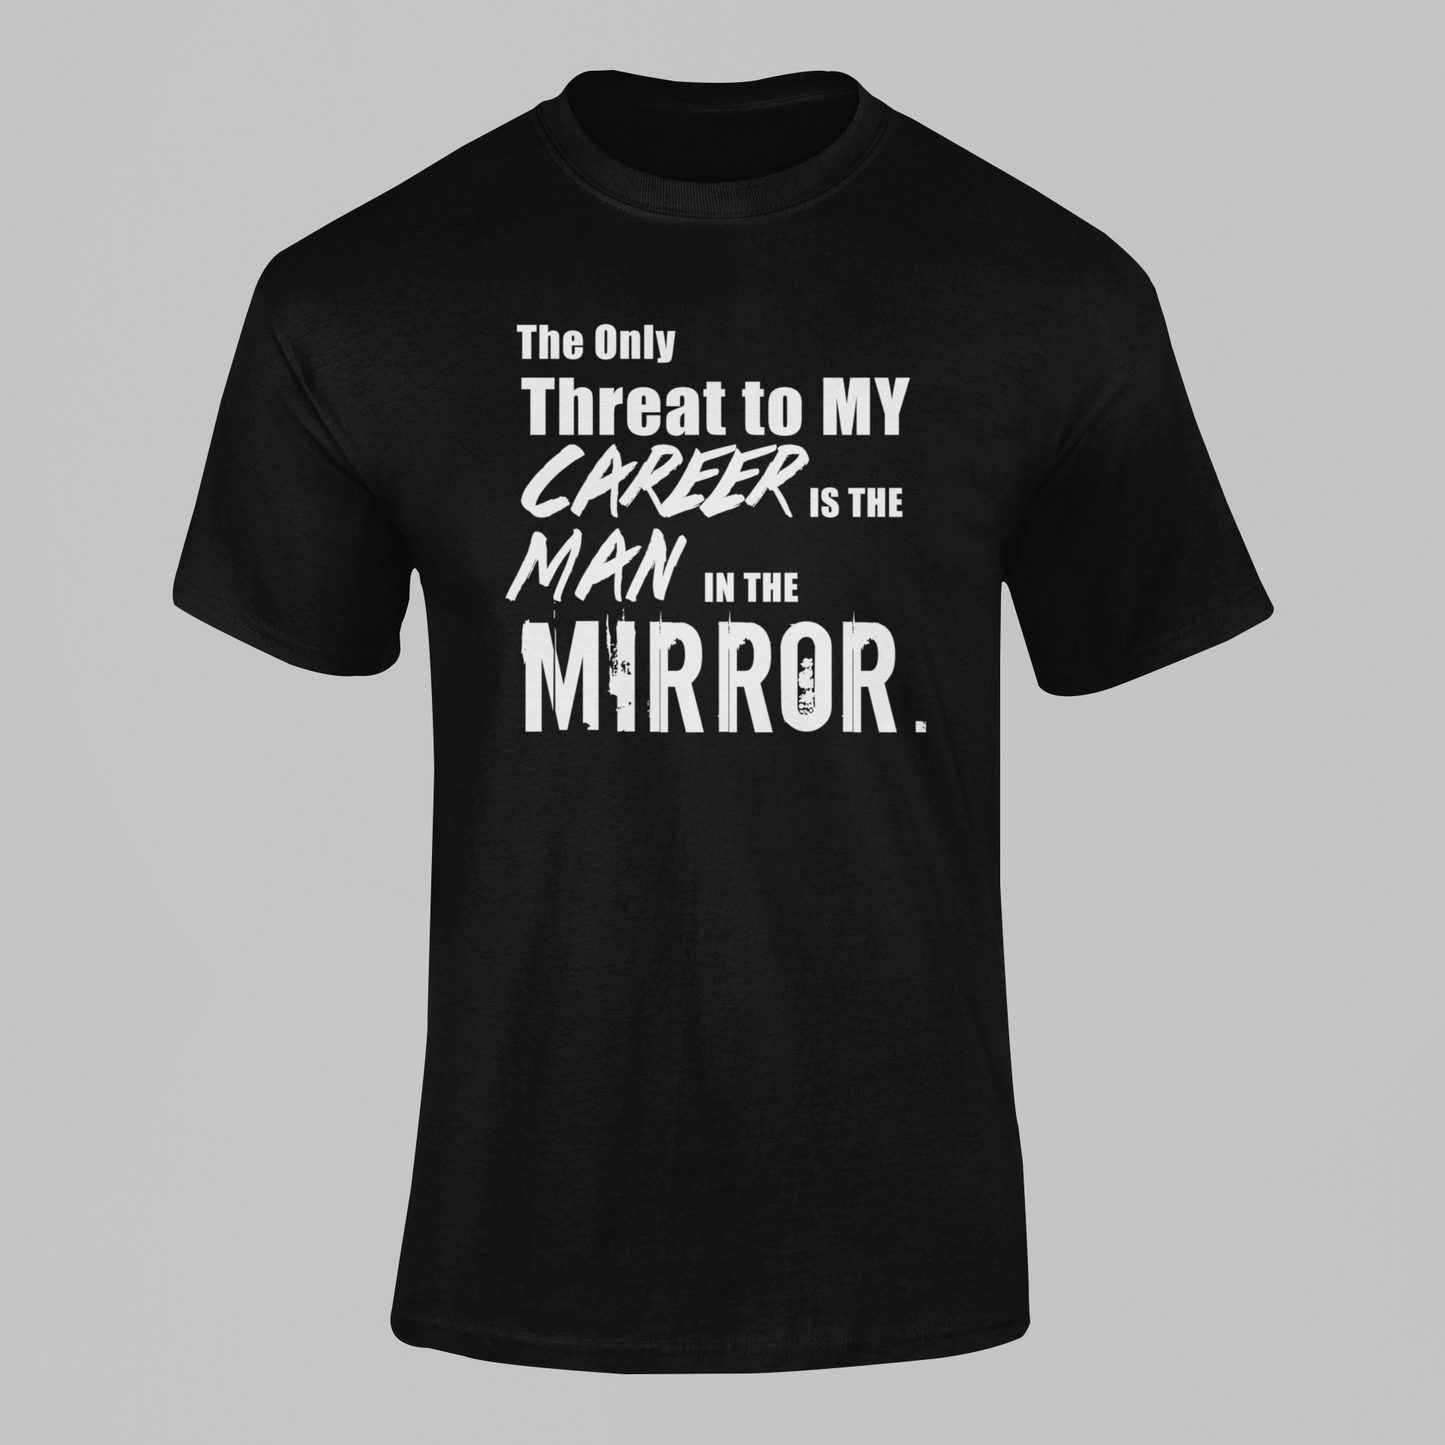 The Only Threat to My Career is the Man in the Mirror Motivational T Shirt